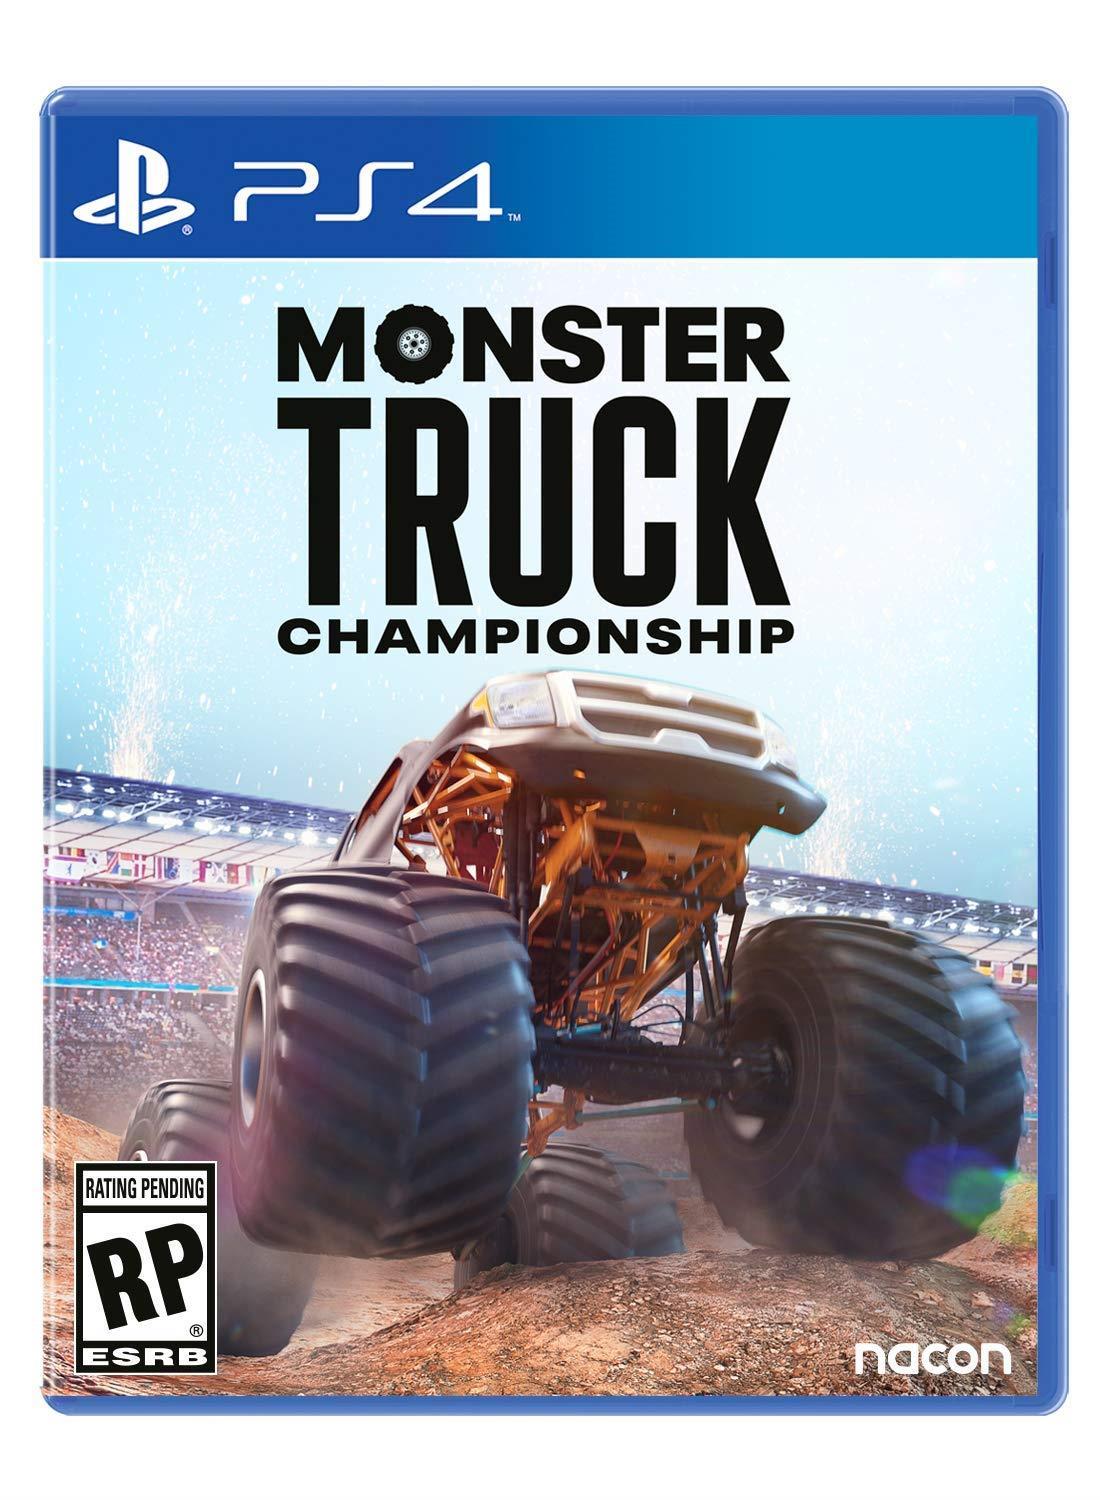 Monster Truck Championship - With these giant vehicles, you will be able all